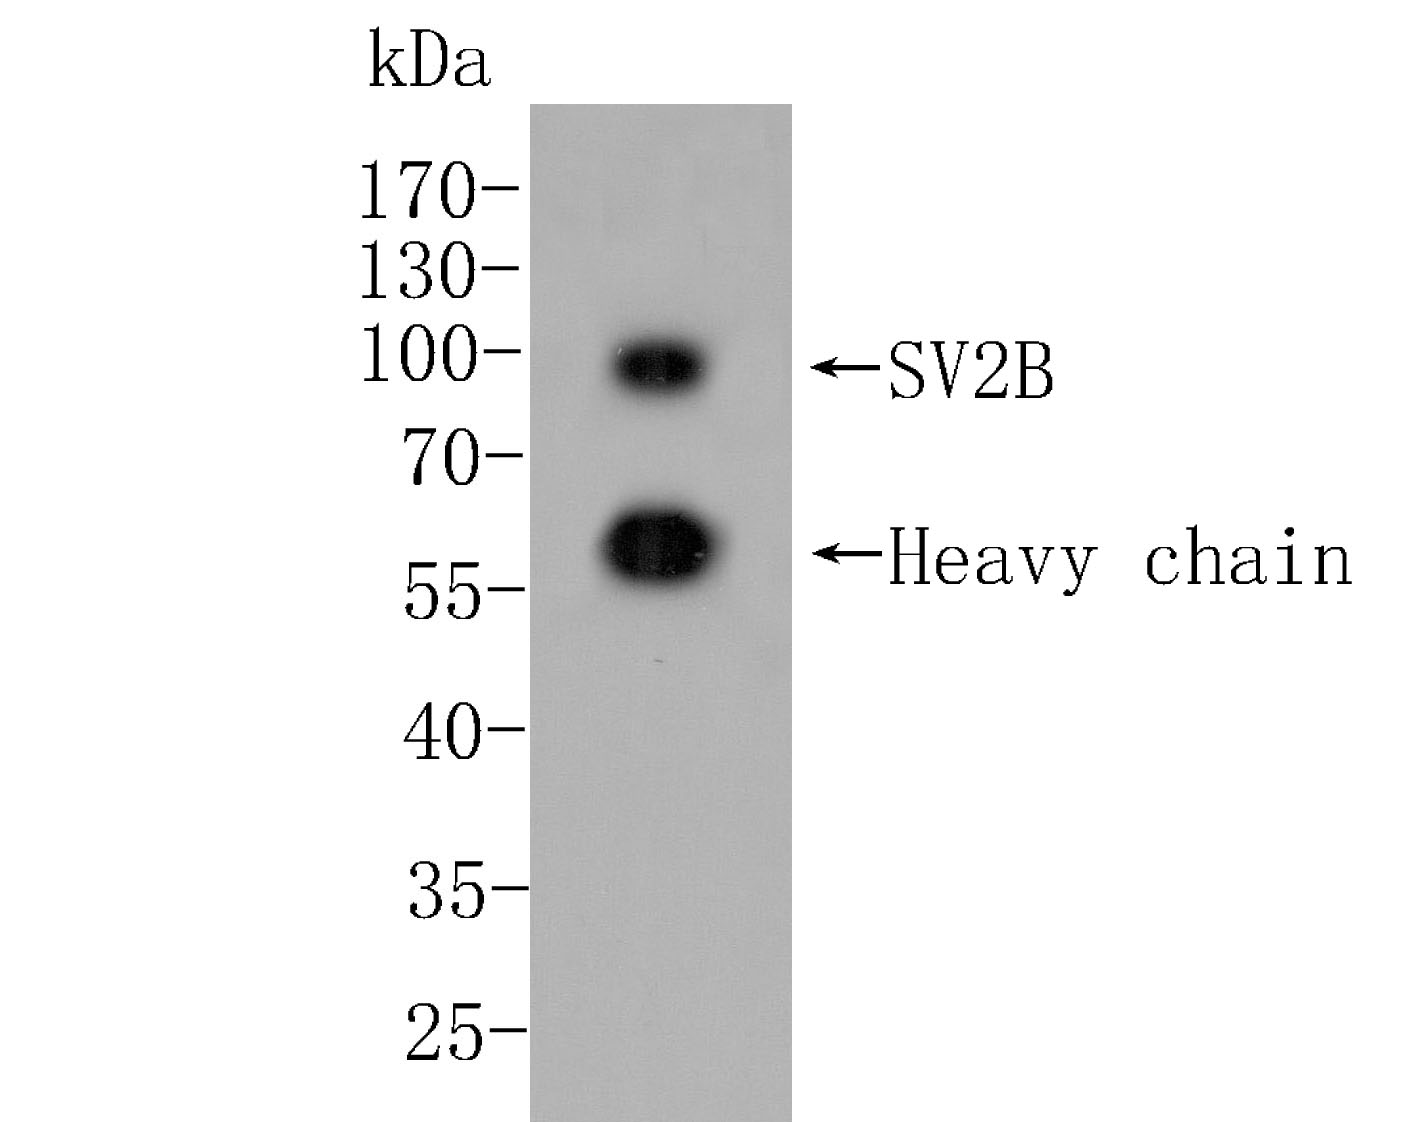 Western blot analysis of SV2B on rat brain tissue lysate. Proteins were transferred to a PVDF membrane and blocked with 5% BSA in PBS for 1 hour at room temperature. The primary antibody (EM1902-40, 1/500) was used in 5% BSA at room temperature for 2 hours. Goat Anti-Mouse IgG - HRP Secondary Antibody (HA1006) at 1:5,000 dilution was used for 1 hour at room temperature.